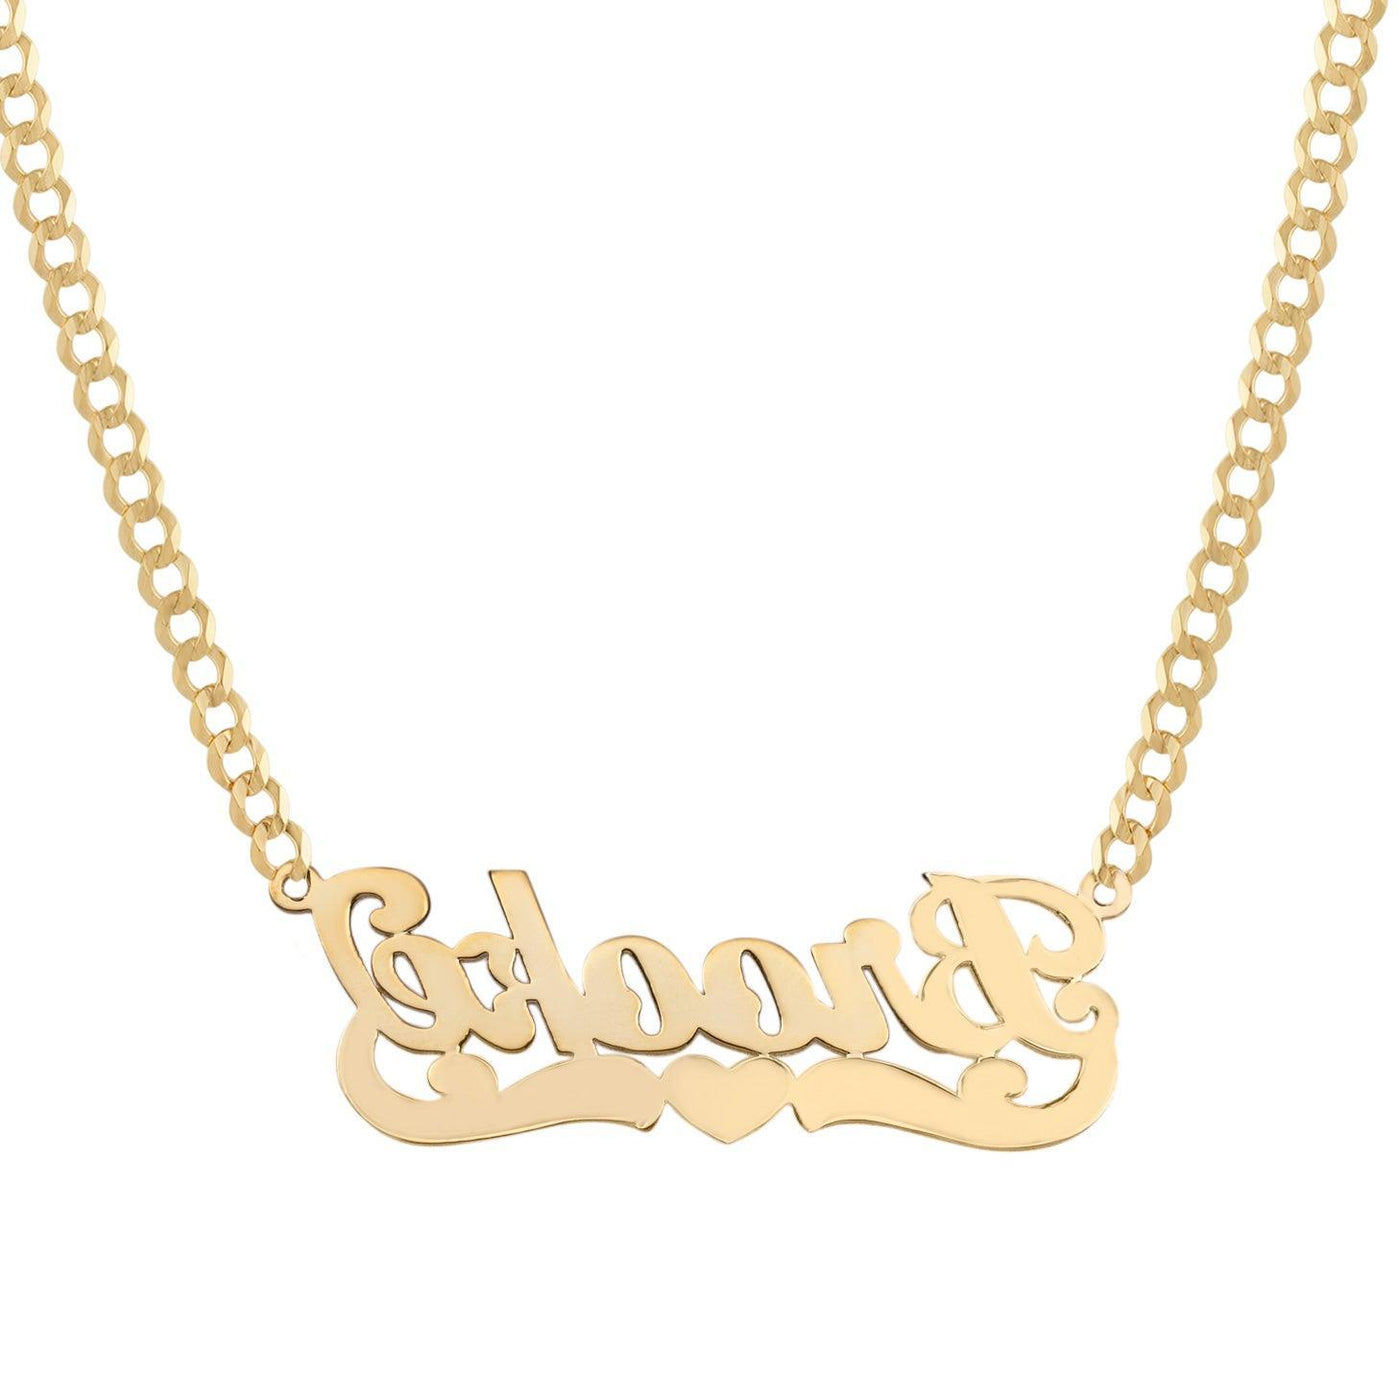 Ladies Script Name Plate Necklace 14K Gold - Style 37 - bayamjewelry